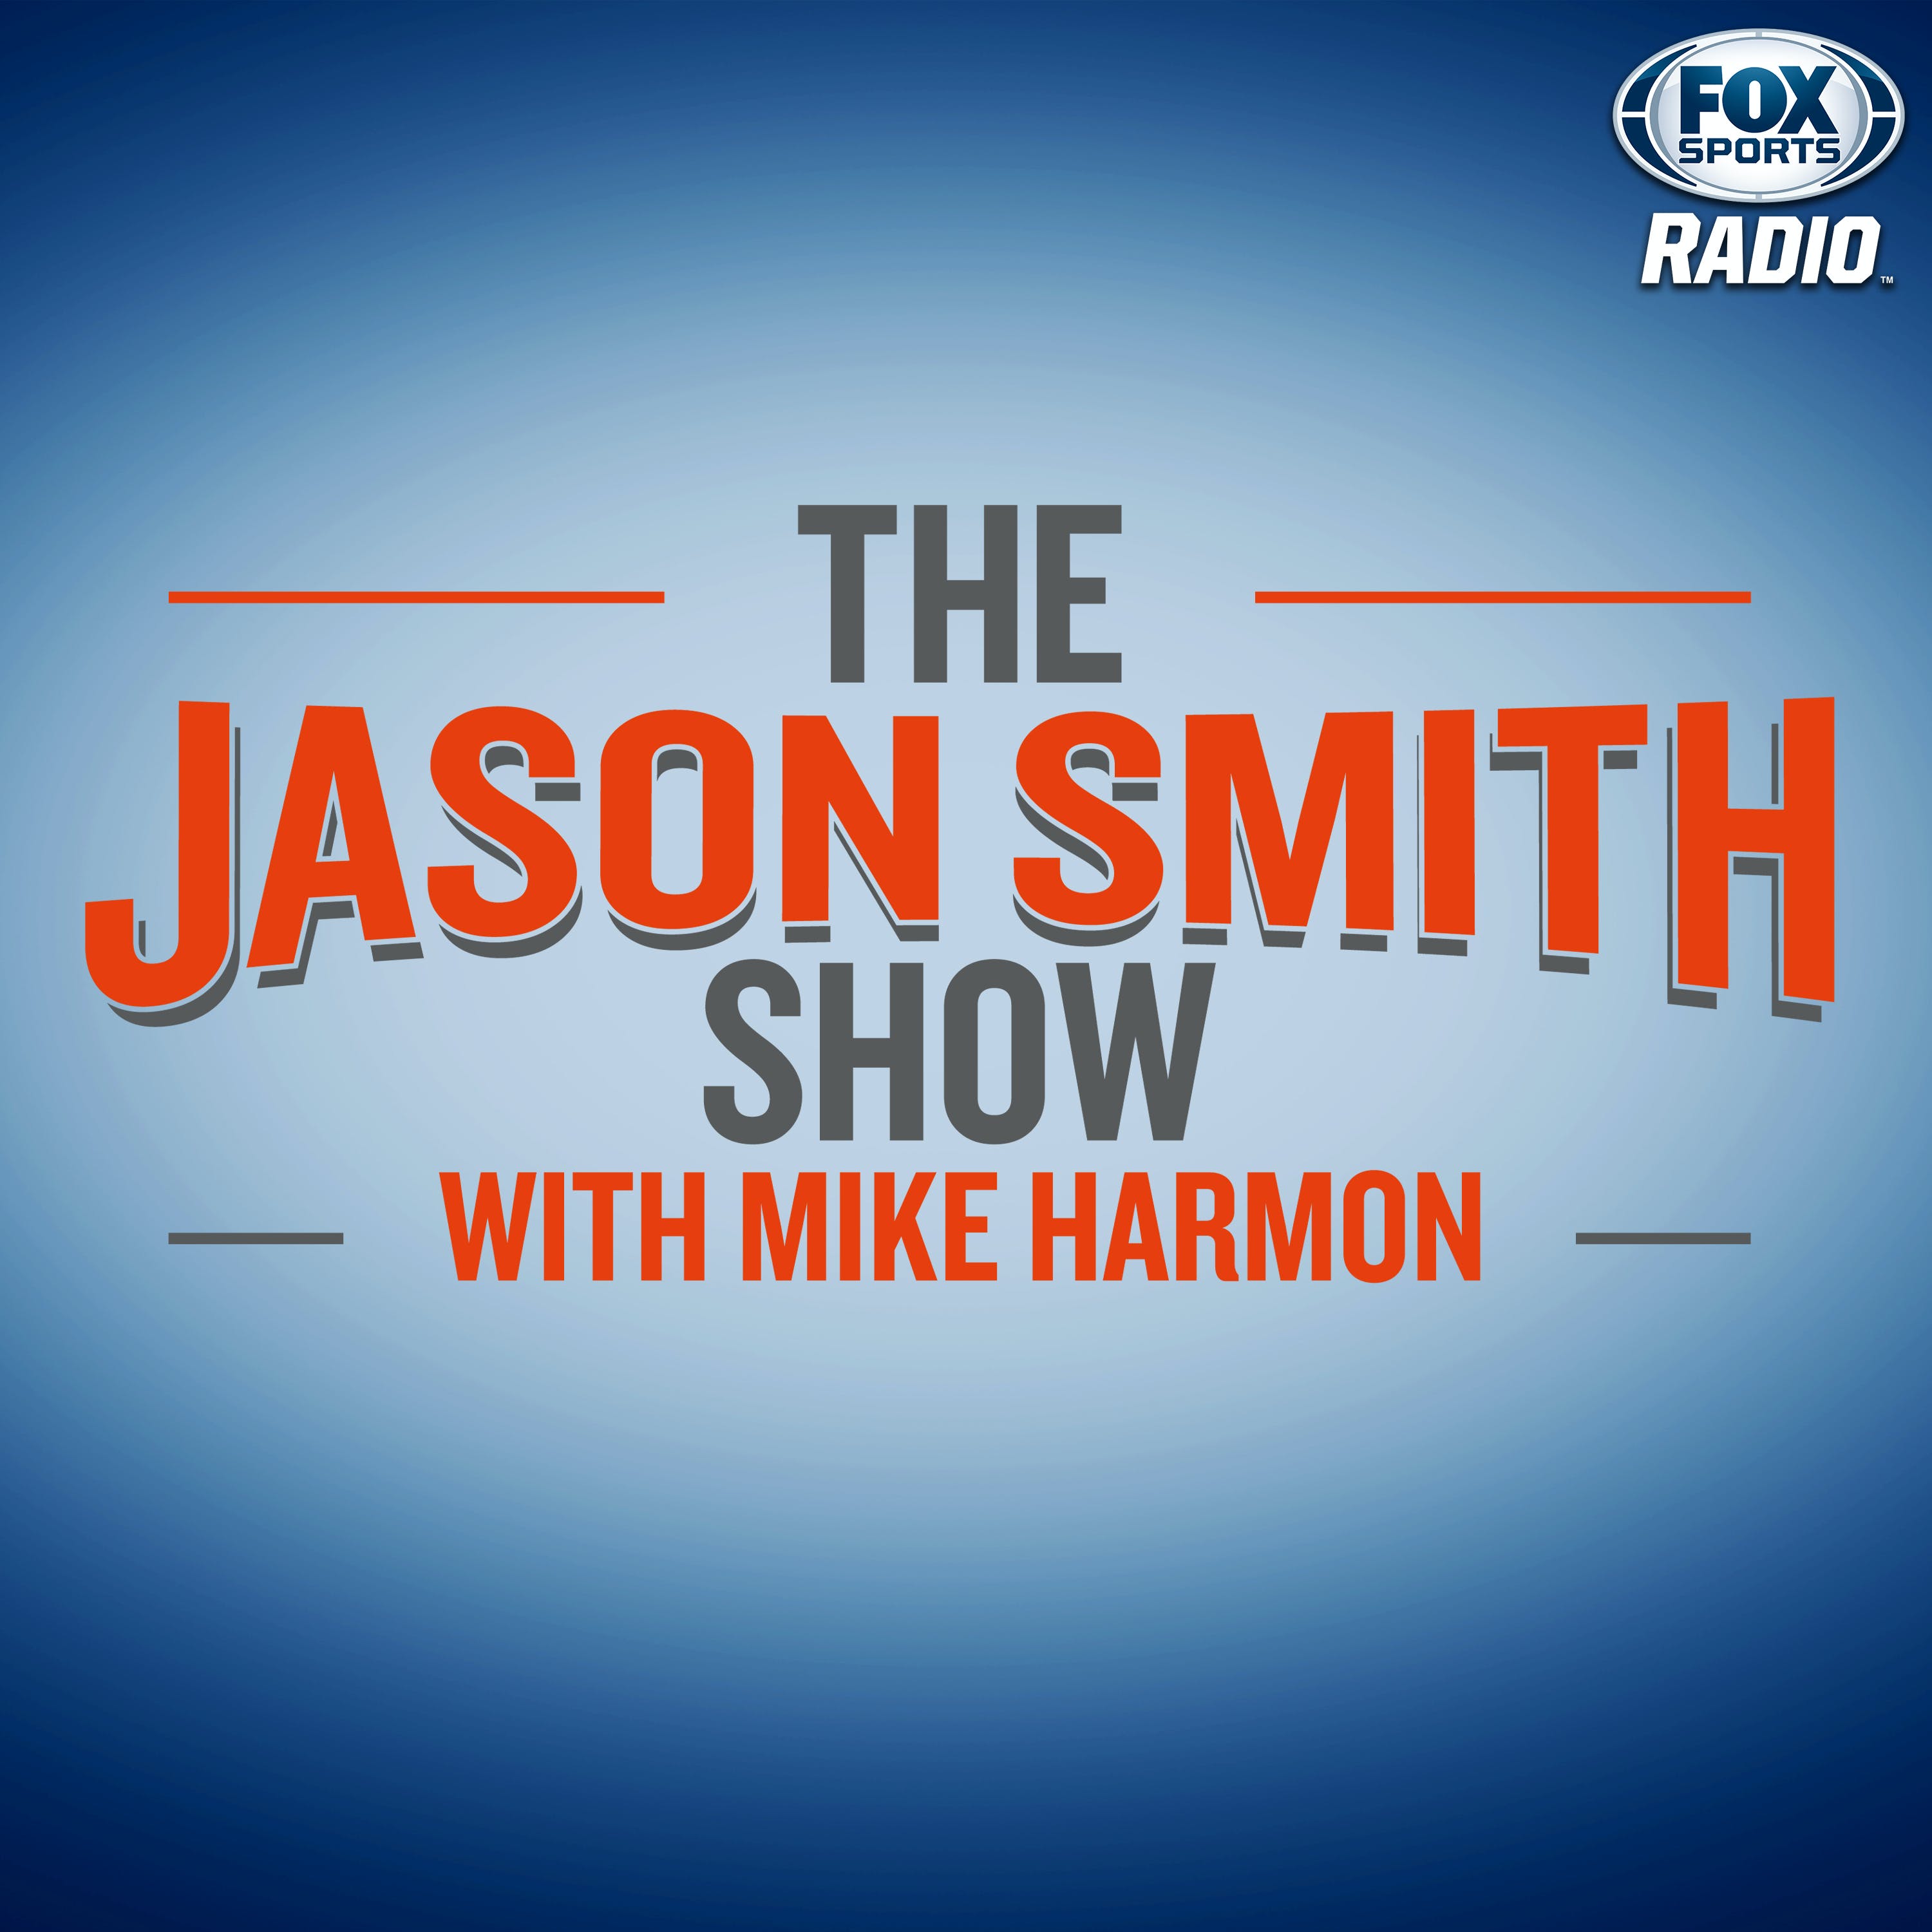 Best of The Jason Smith Show with Mike Harmon